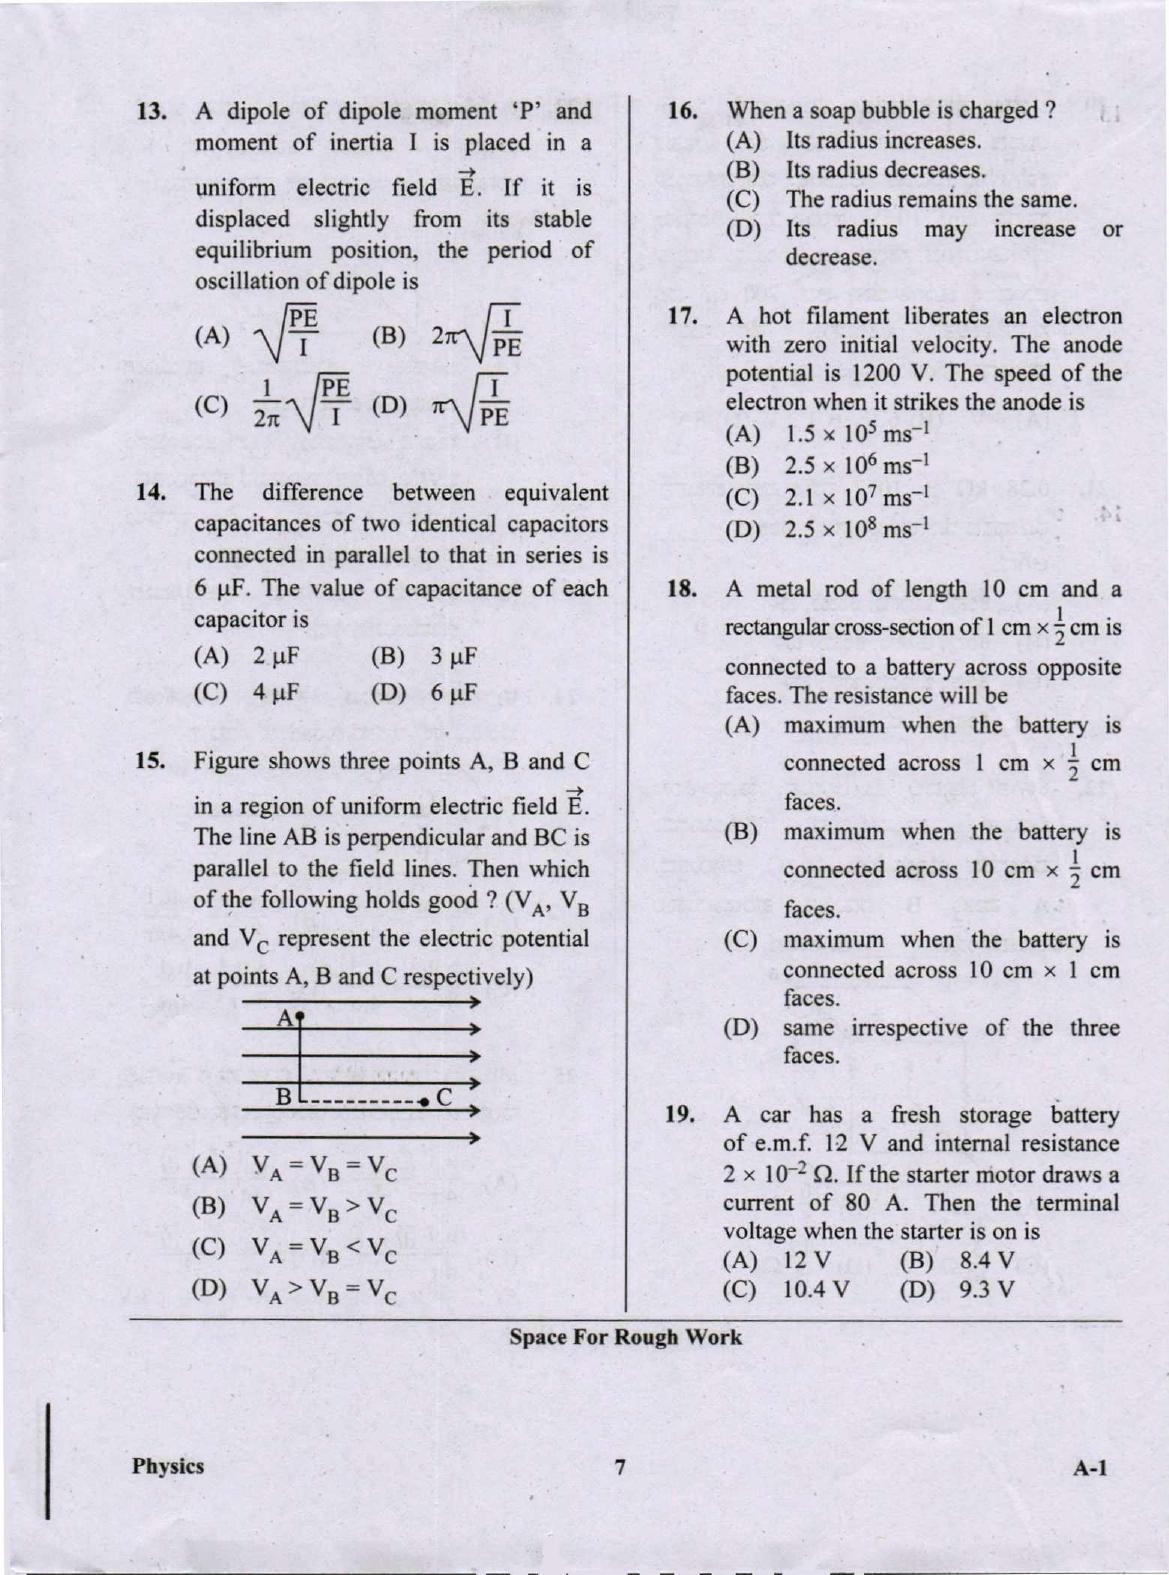 KCET Physics 2020 Question Papers - Page 7